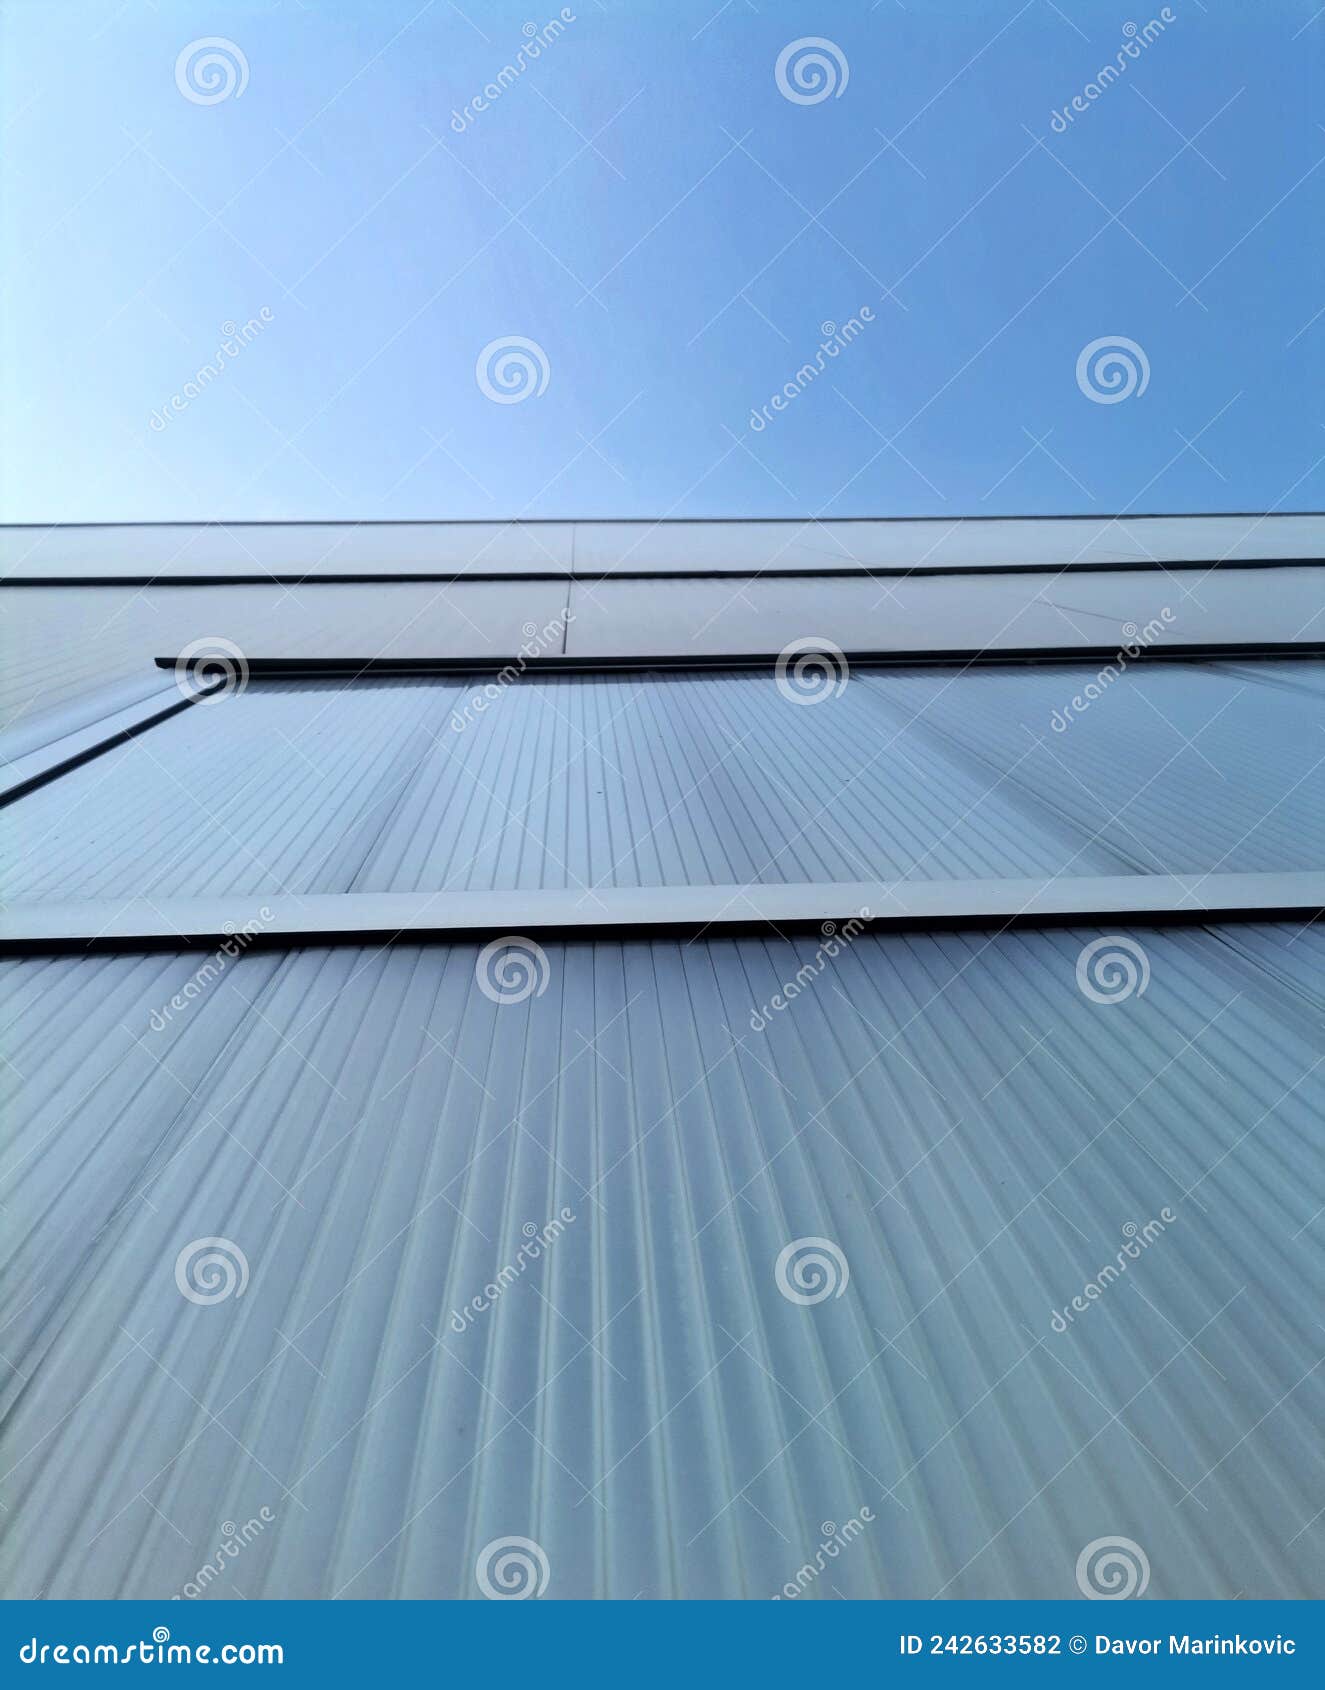 Building with Large Glass Surfaces, Crystal Clear Sky Stock Photo ...